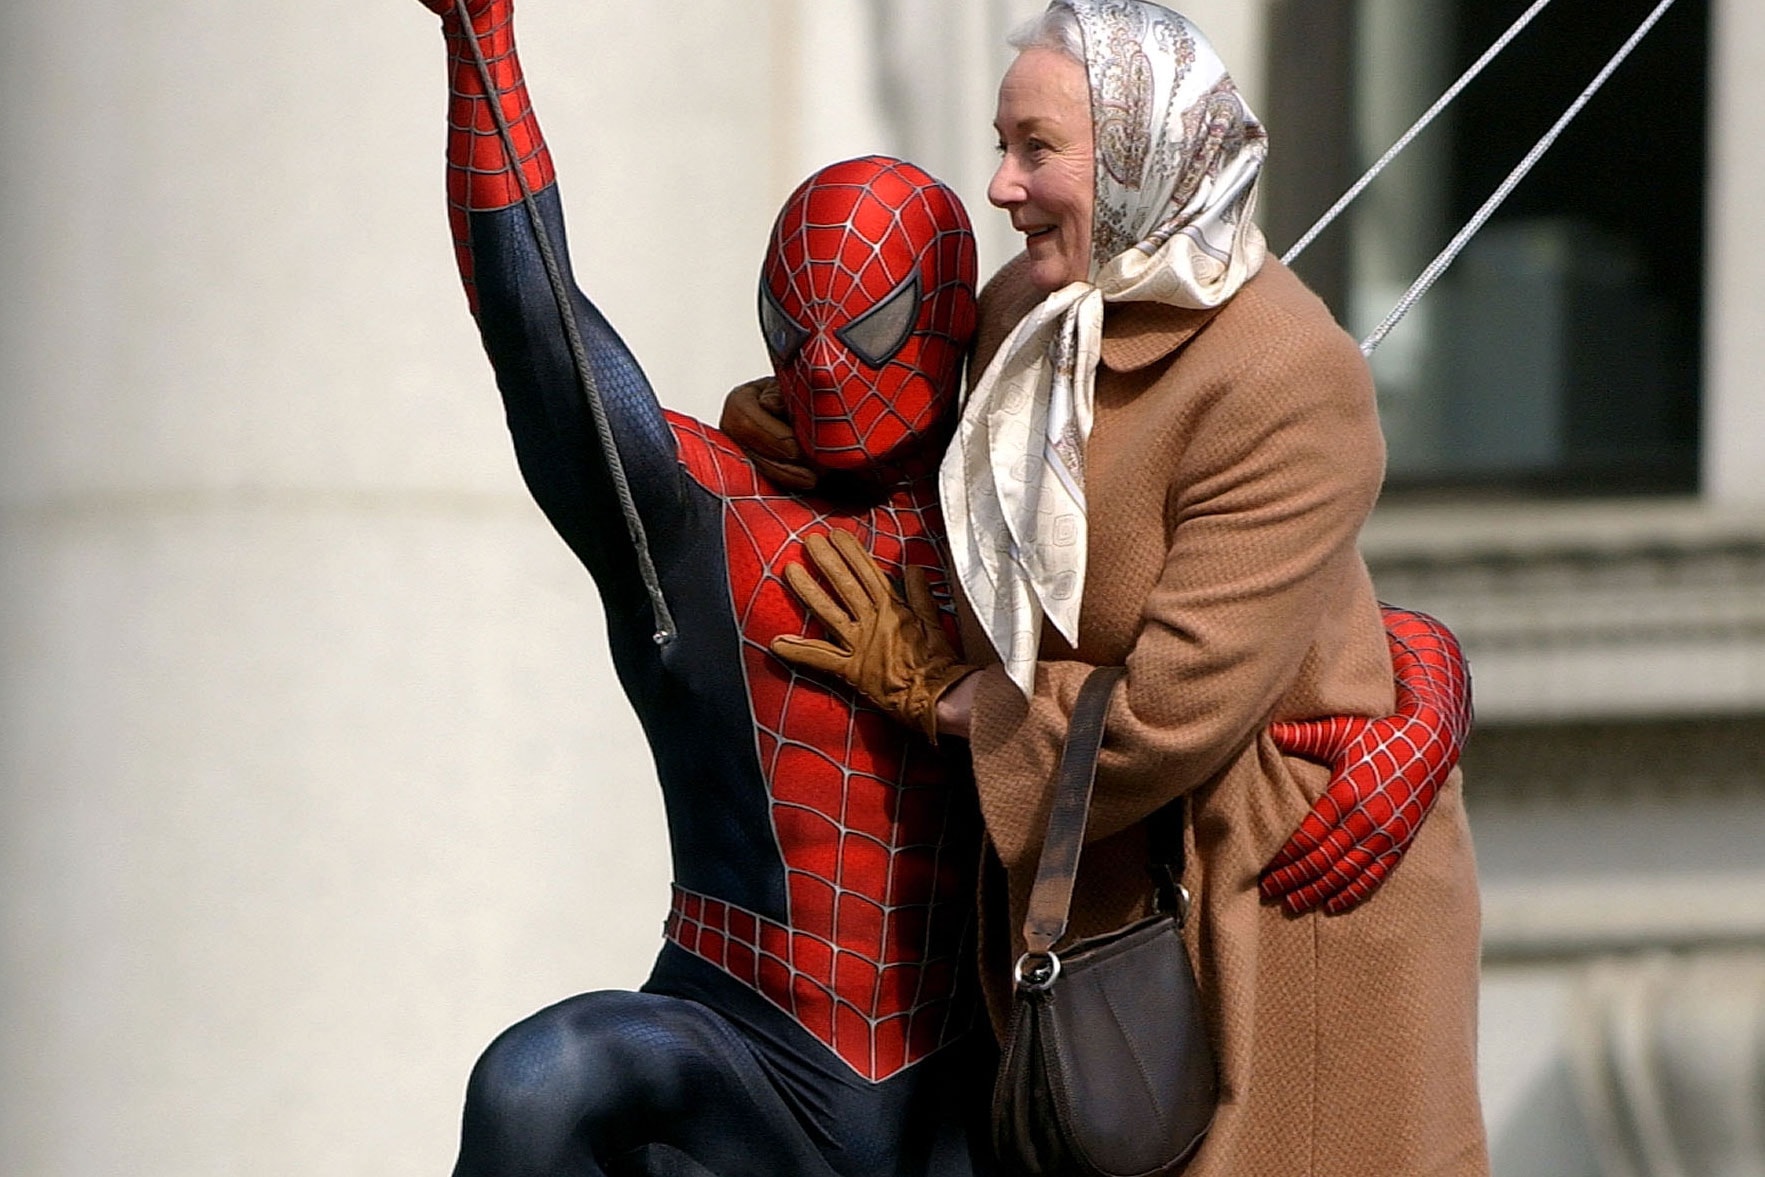 Spider-man: No Way Home Tobey Maguire costume potentially spotted BarkBox Twitter Sam Raimi films movies marvel 